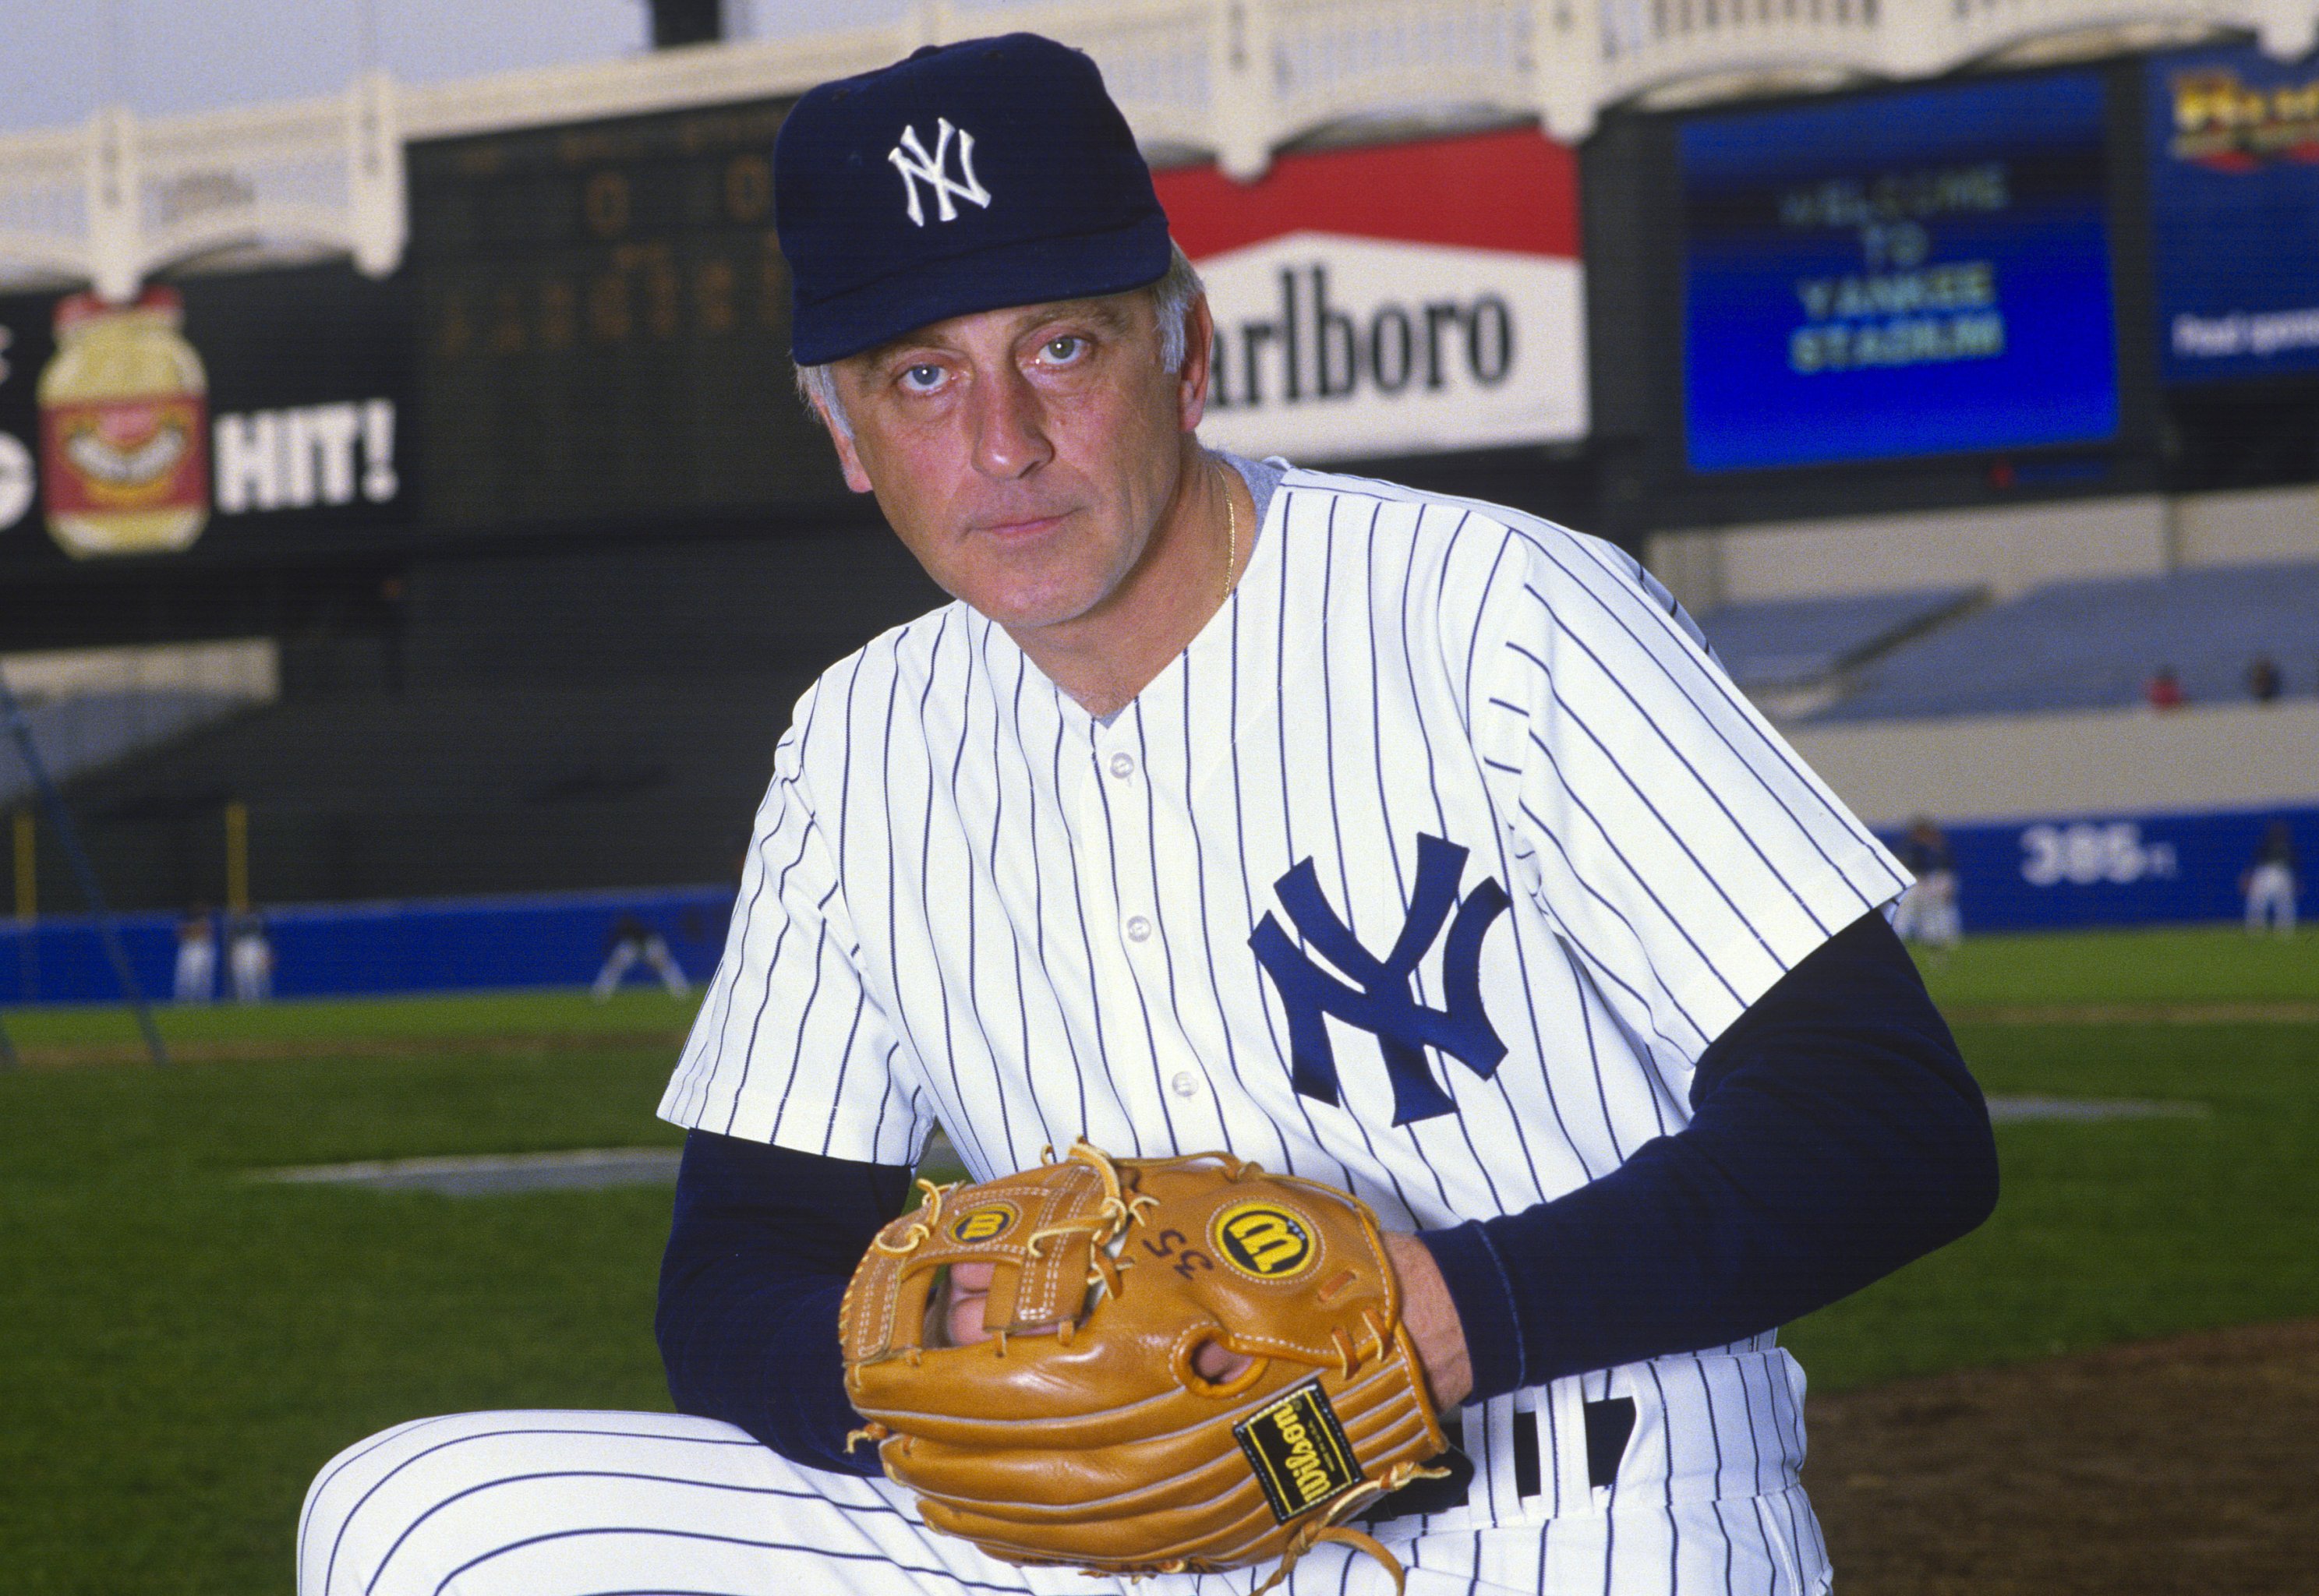 Move to Yankees showed Niekro had plenty of pitches remaining